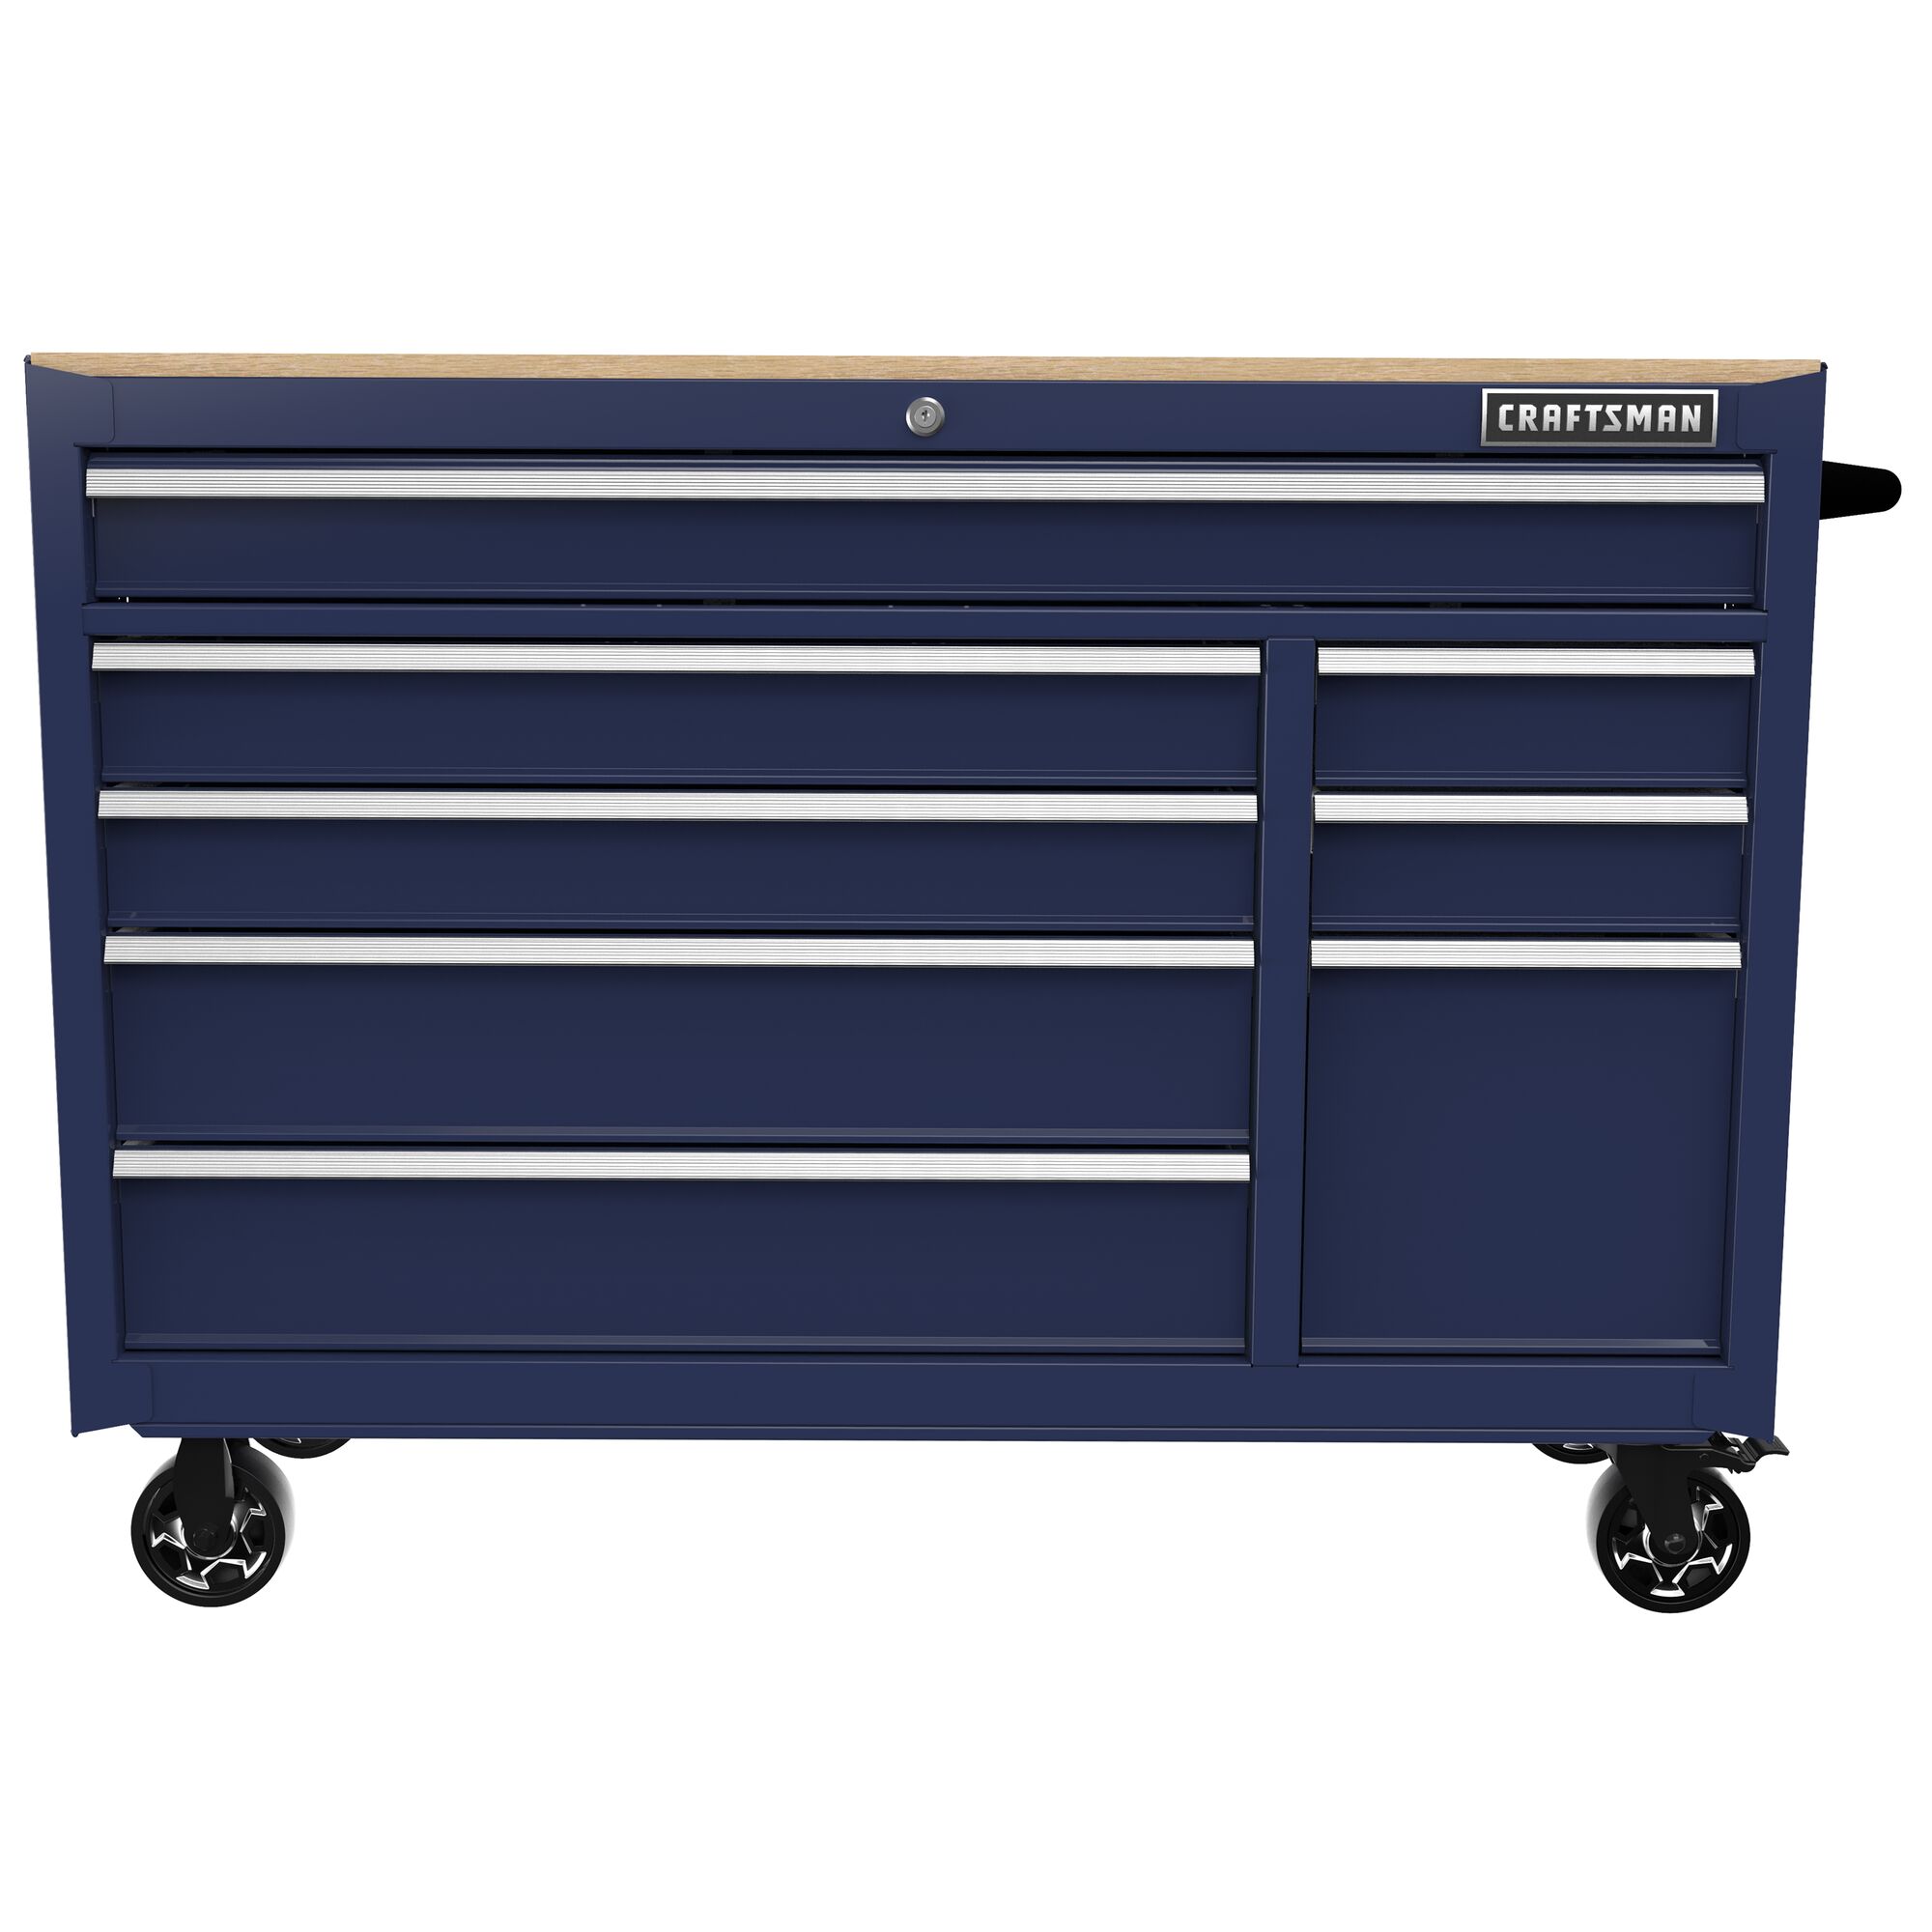 CRAFTSMAN 2000 Series 51.2-in L x 37.5-in H 8-Drawers Rolling